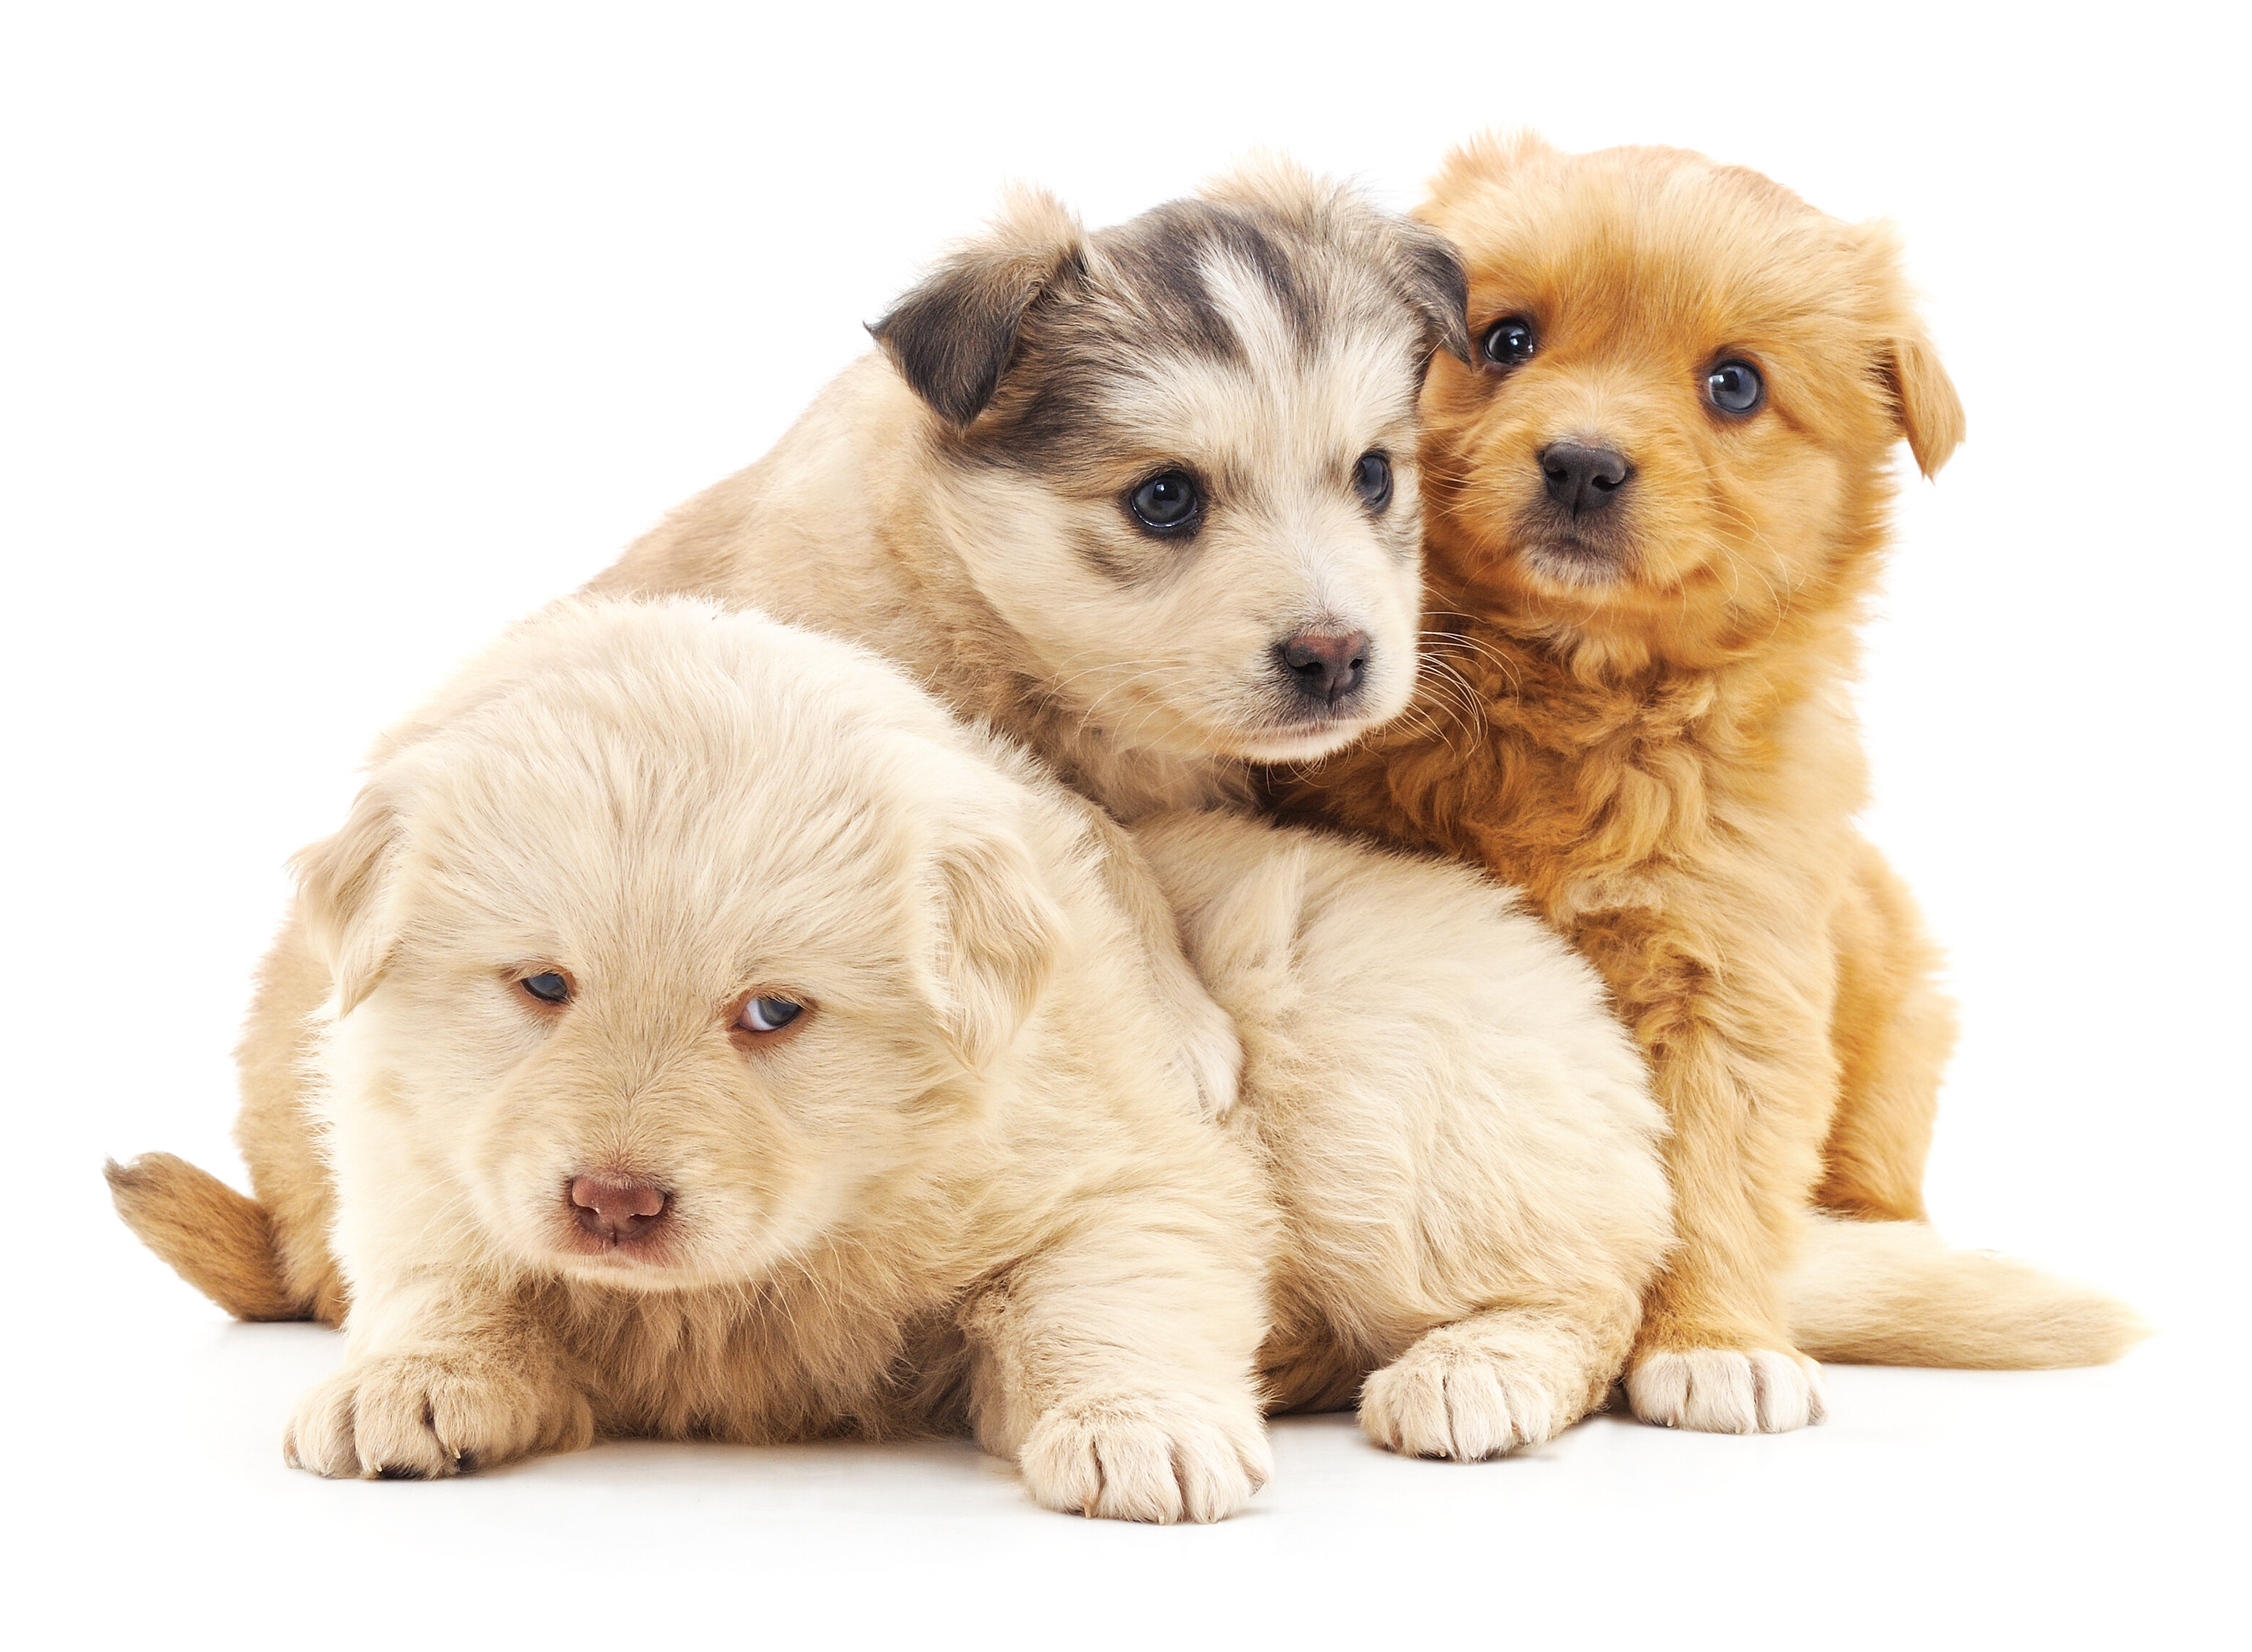 a photo of cute little puppies